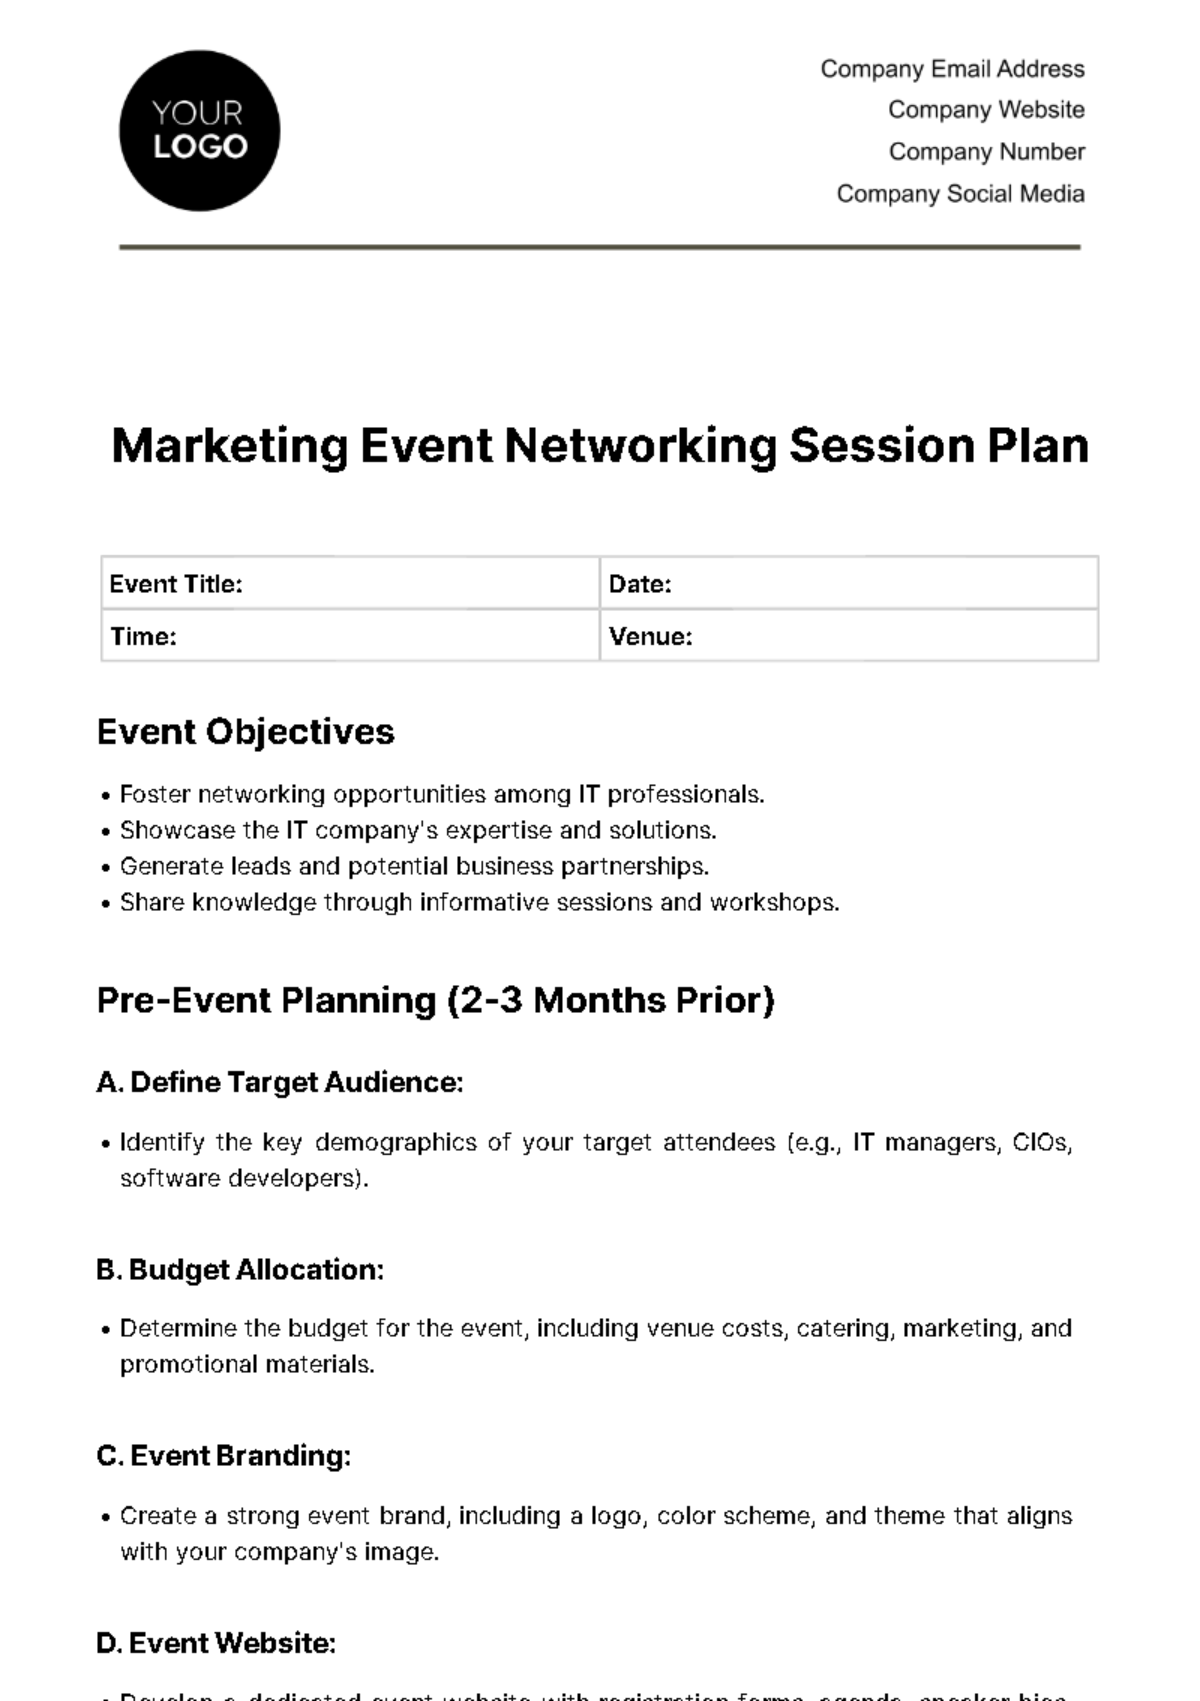 Free Marketing Event Networking Session Plan Template